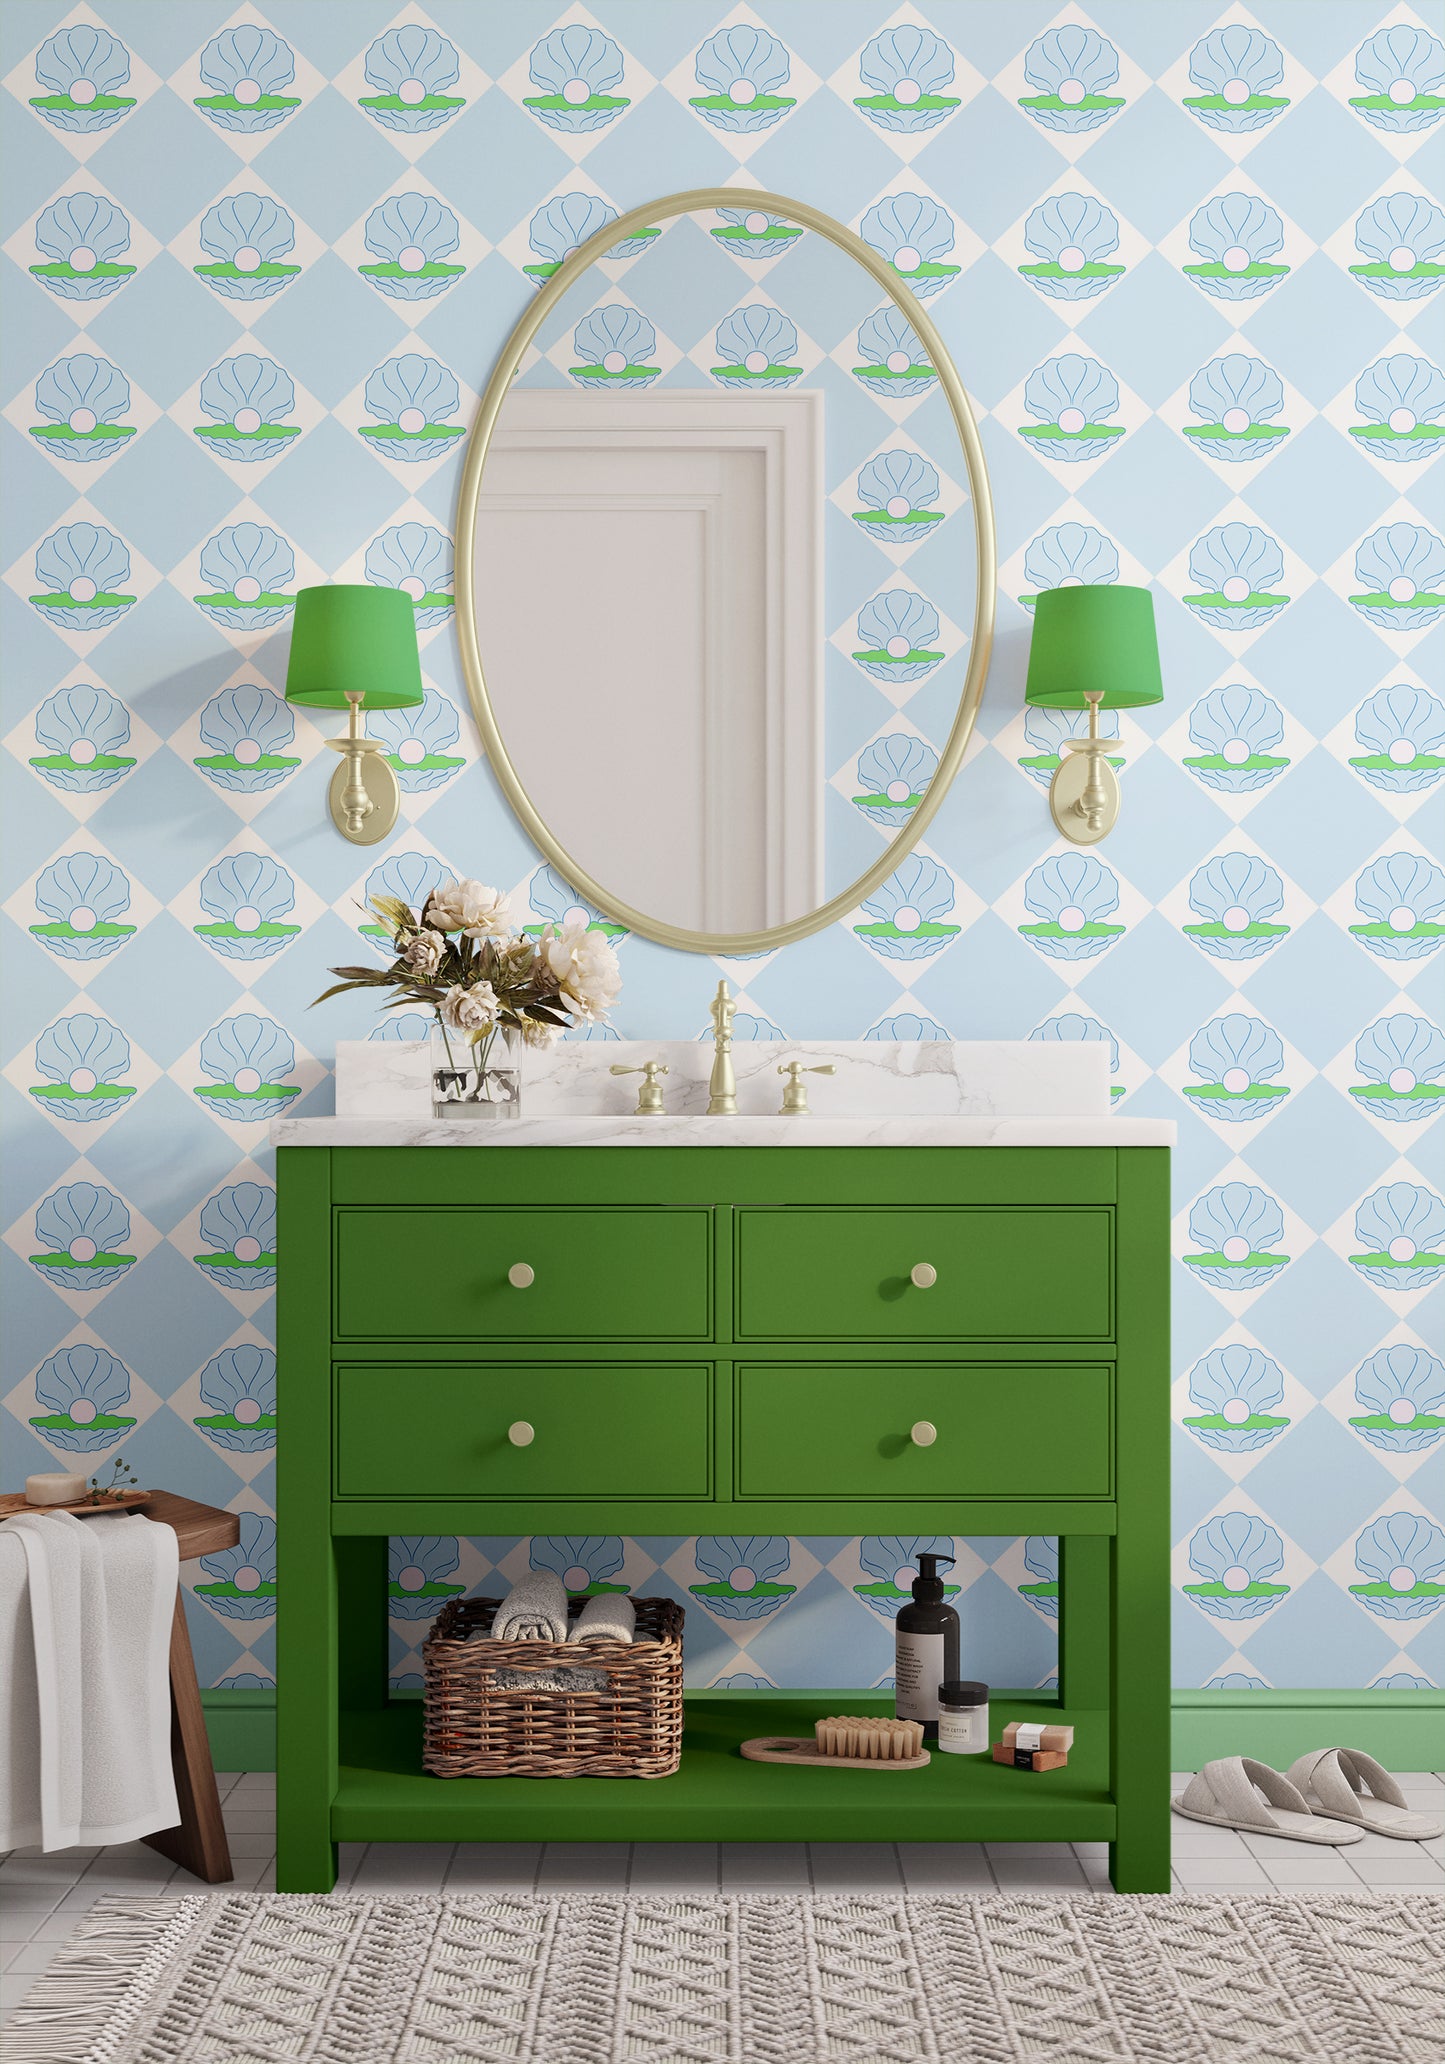 shell wallpaper for bathroom walls in blue and green colours